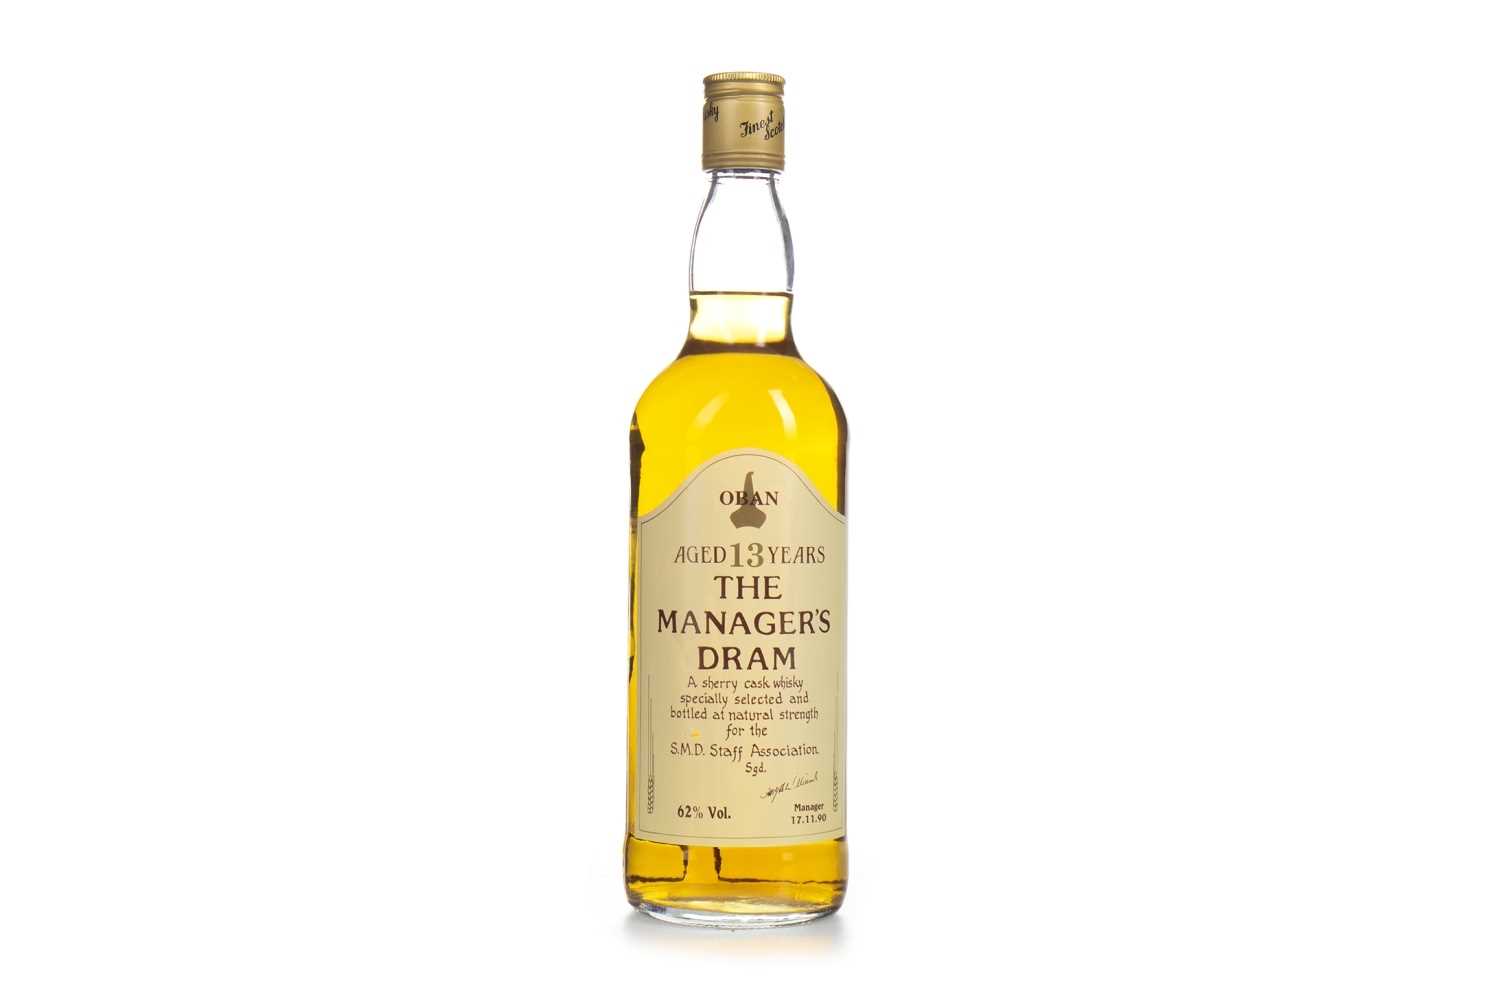 Lot 6 - OBAN THE MANAGERS DRAM AGED 13 YEARS